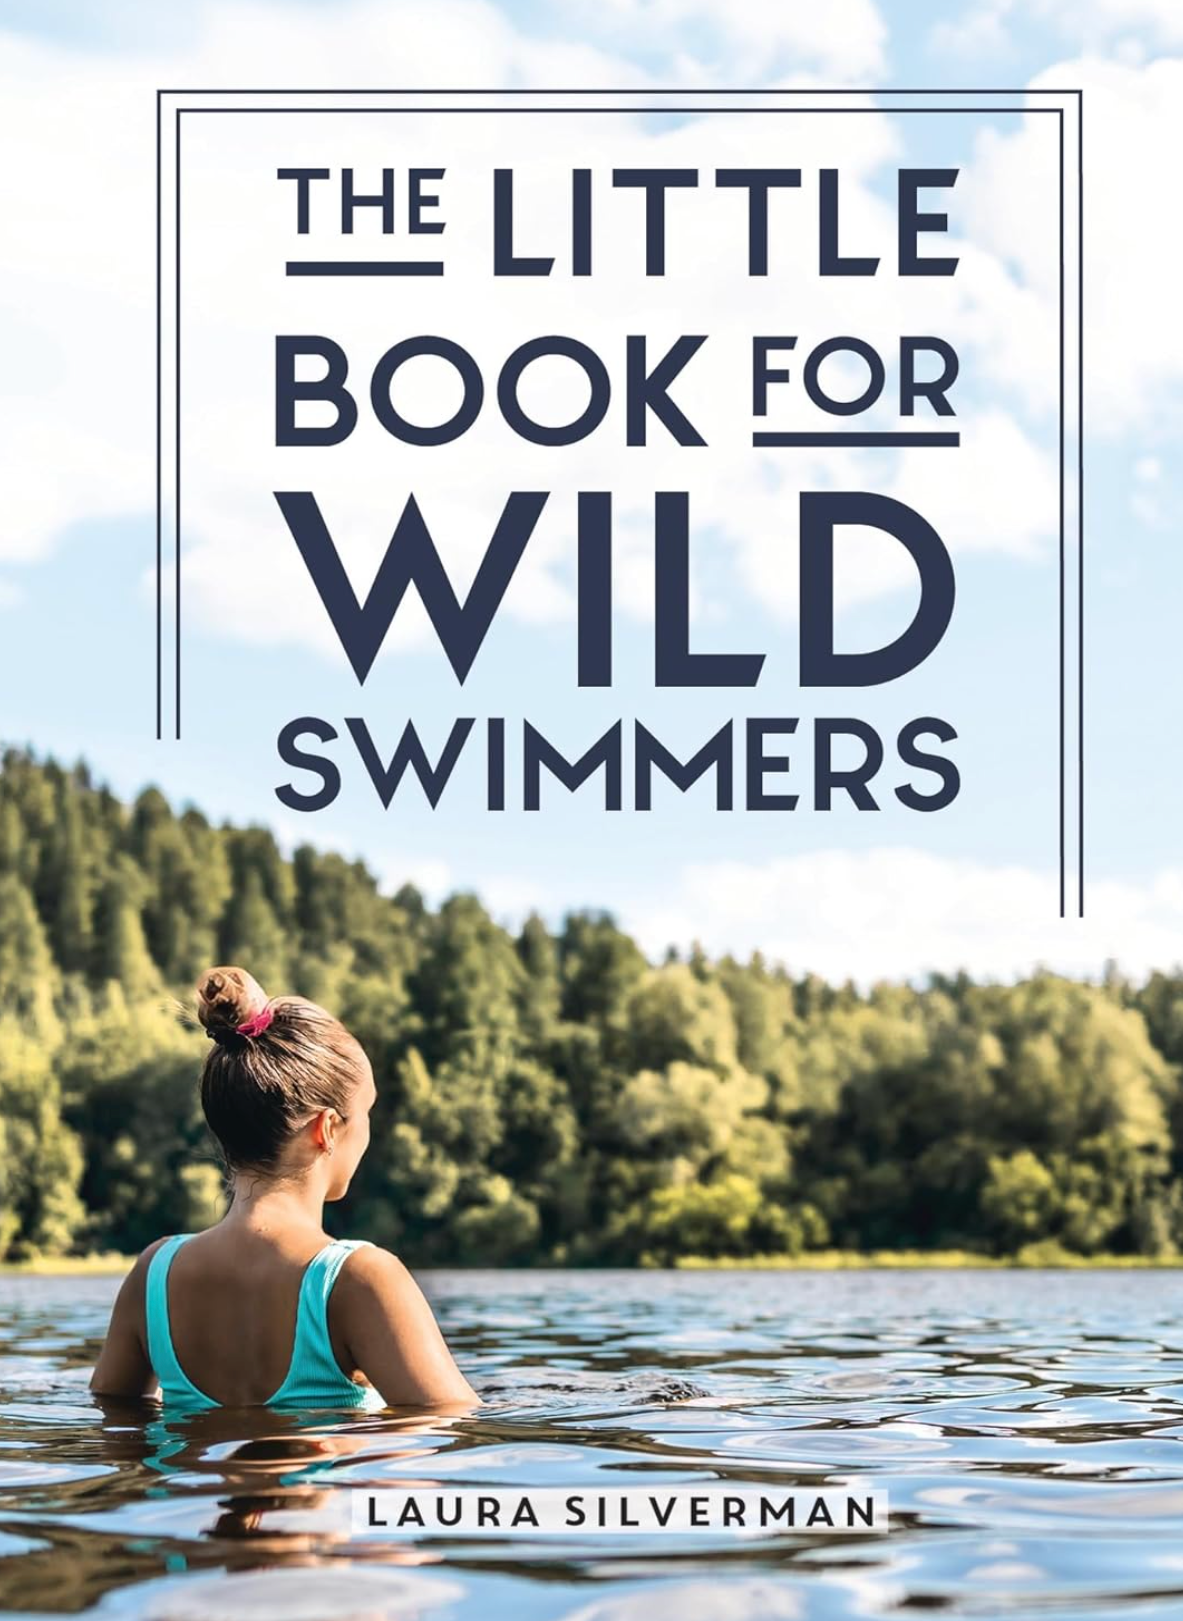 The Little Book for Wild Swimmers - Laura Silverman